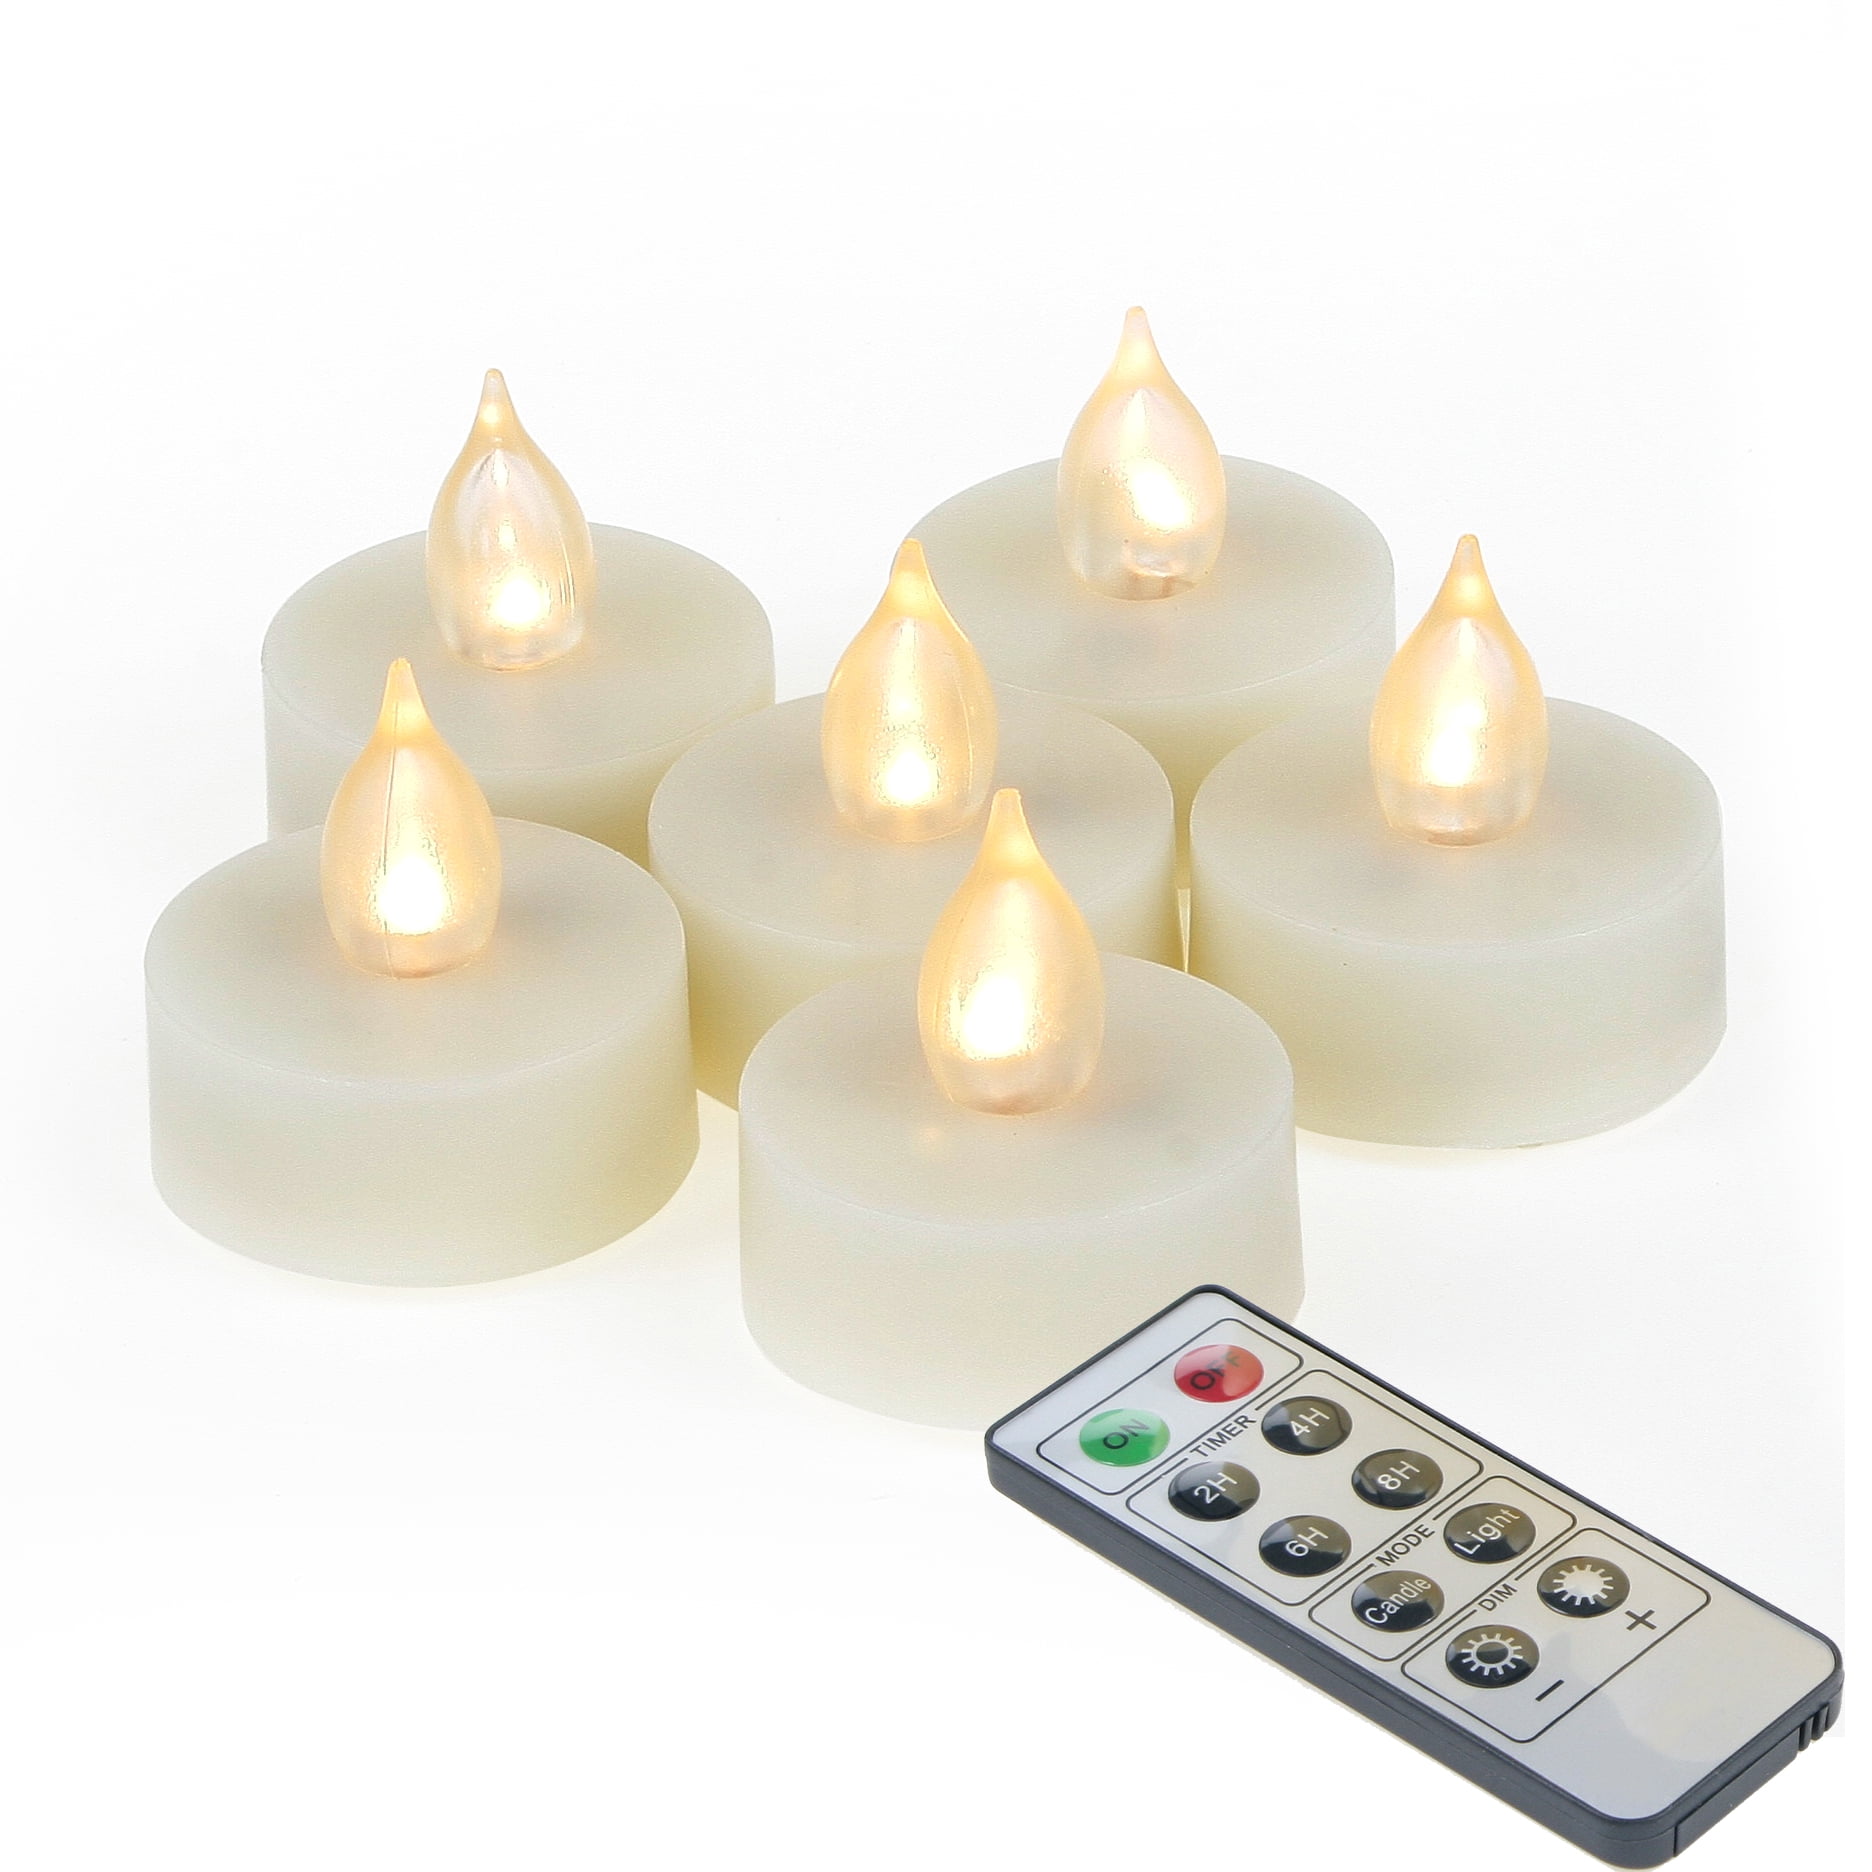 Pack Flickering Battery Operated Tea Light with Remote Timer, Electric Led Bright Votive Tealight Little Candles for Pumpkin Christmas Celebration Wedding Home Decoration, Warm White Walmart.com